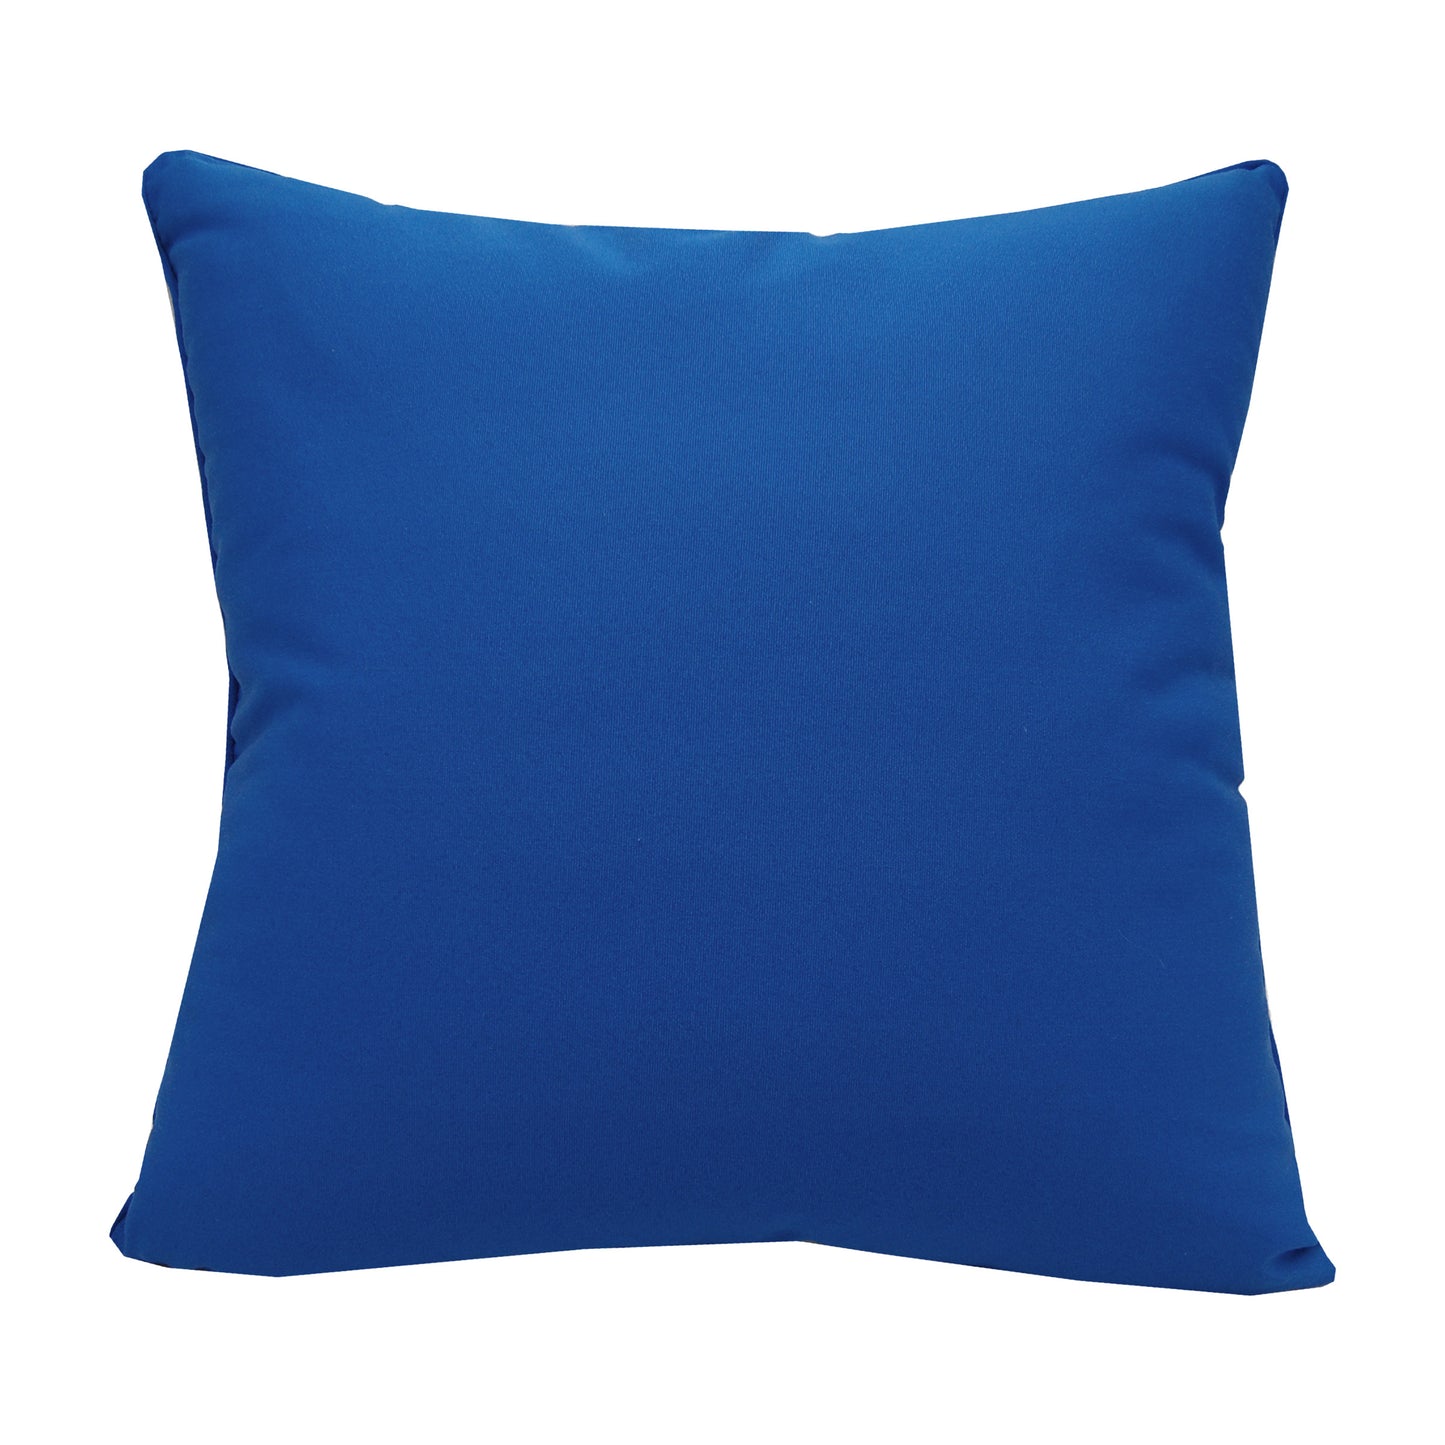 Solid blue fabric; back side of Blue Dragonfly outdoor pillow.